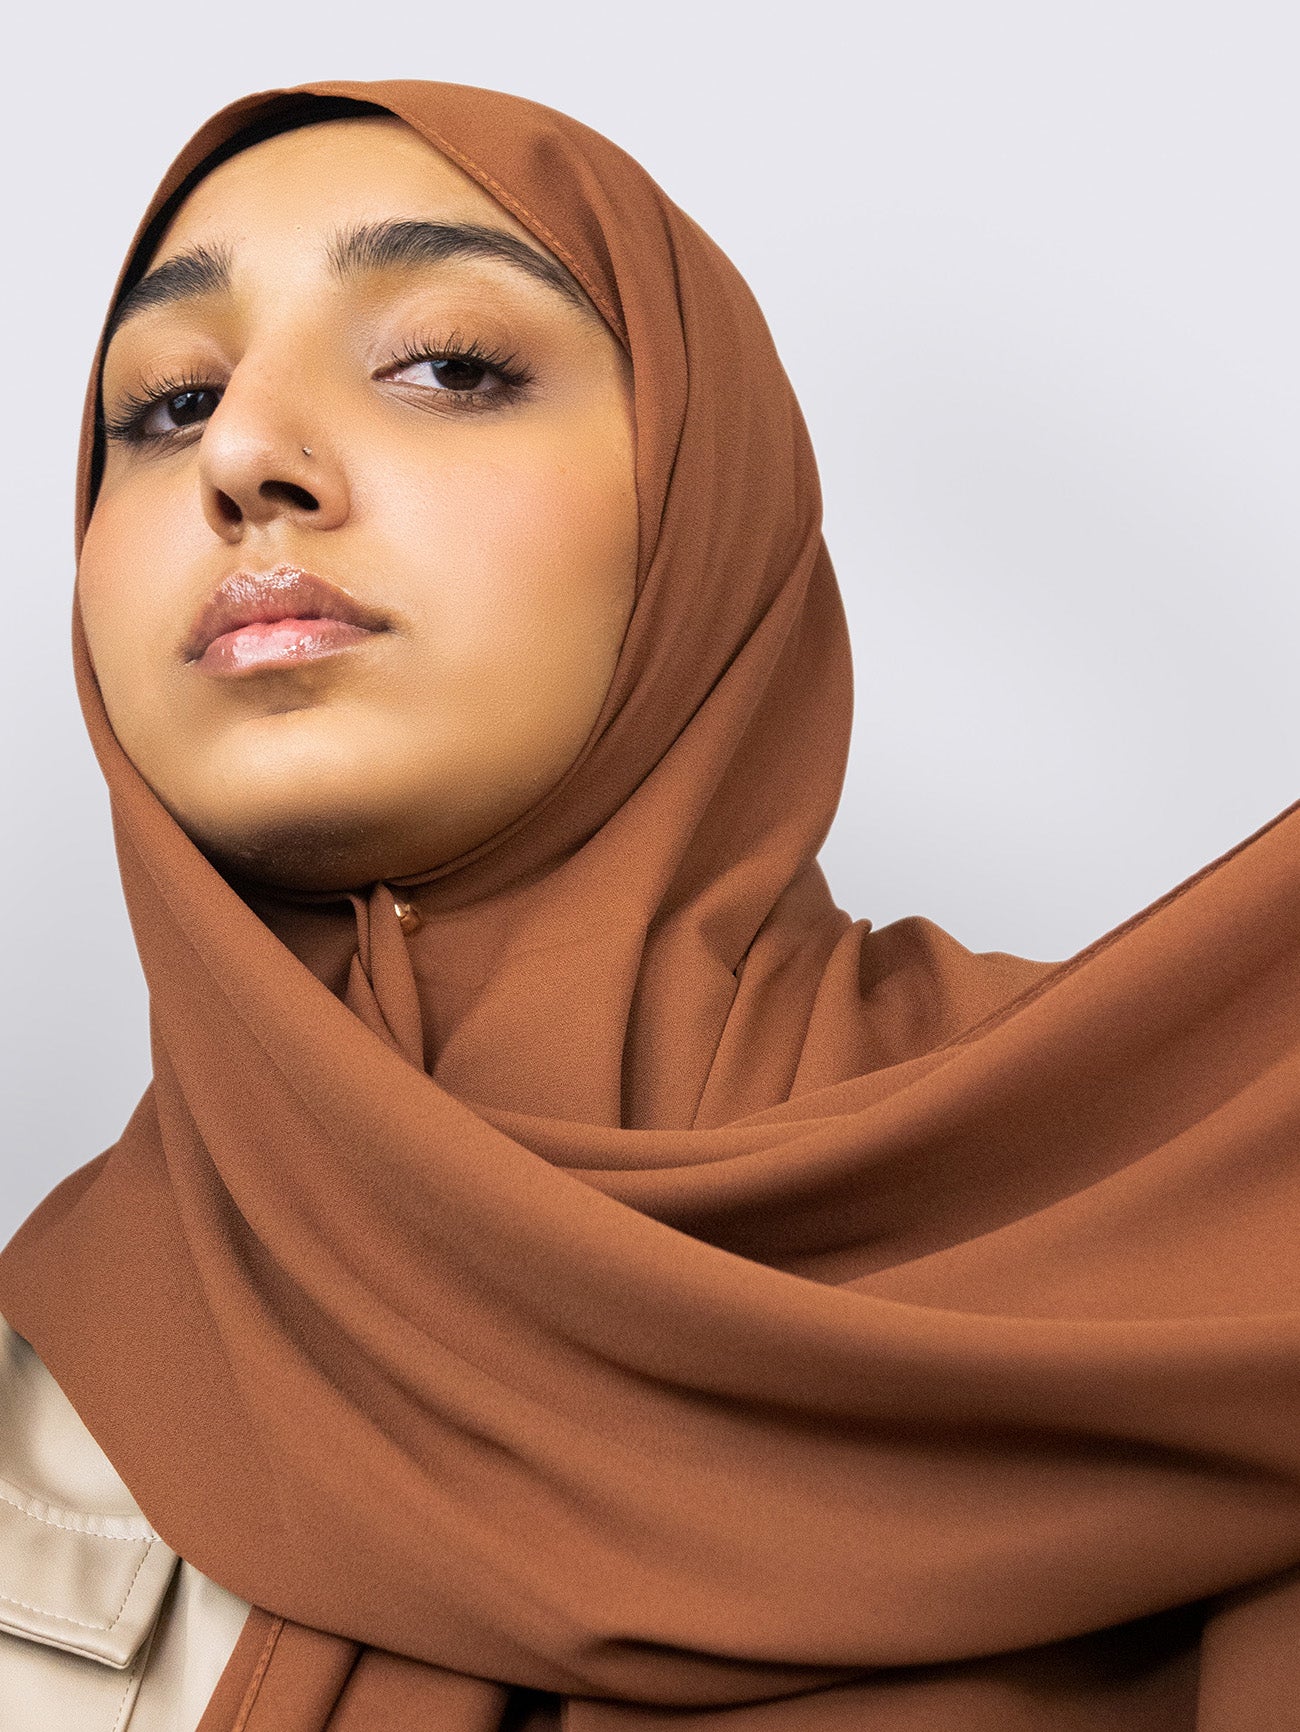 luxury comes in simplicity with @shoplbh 's korean chiffon hijabs